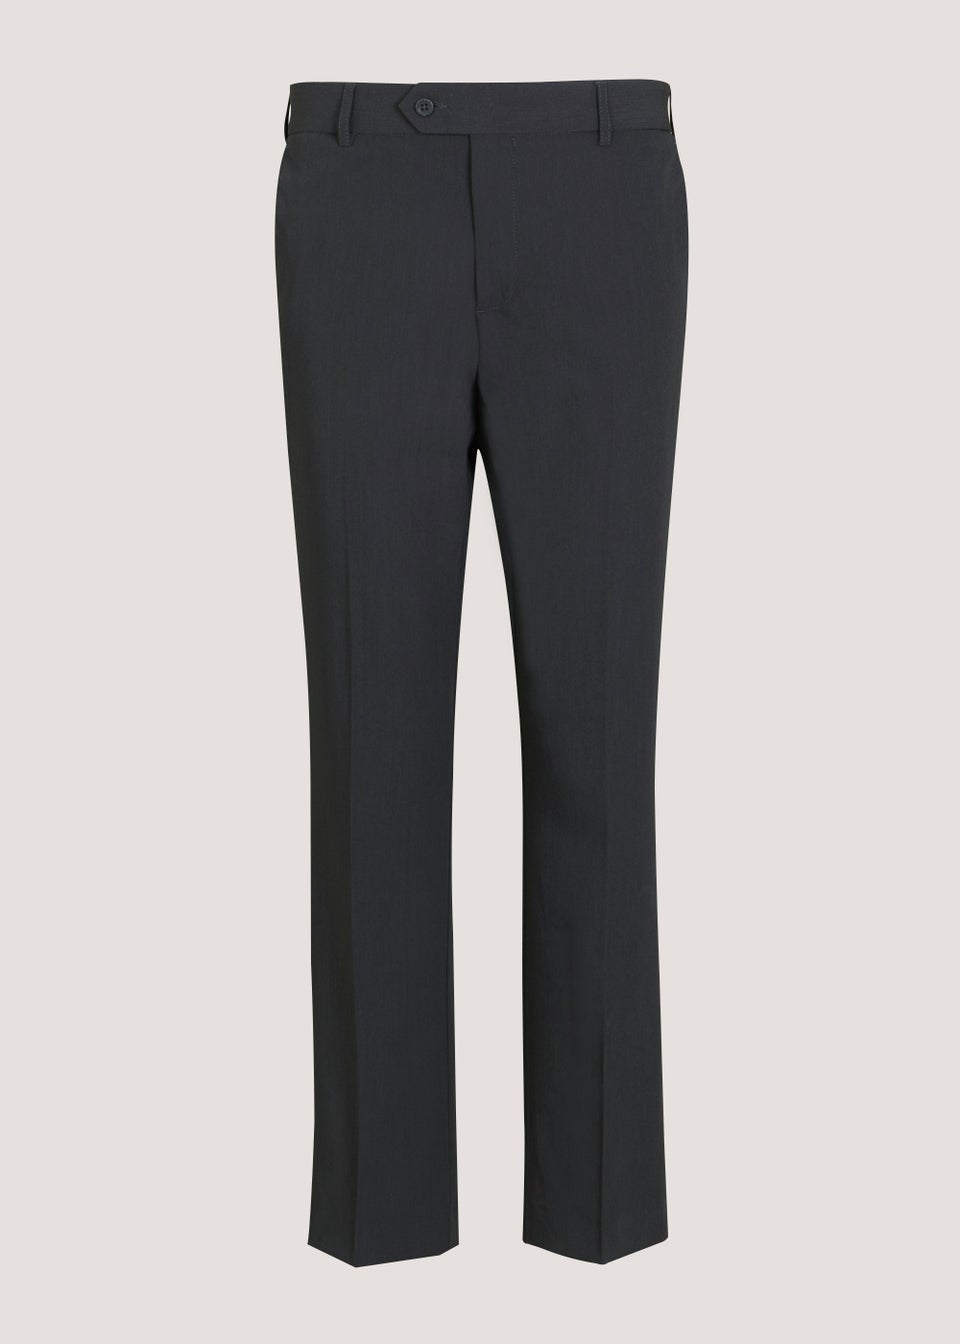 Farah Charcoal Stretch Active Waist Trousers